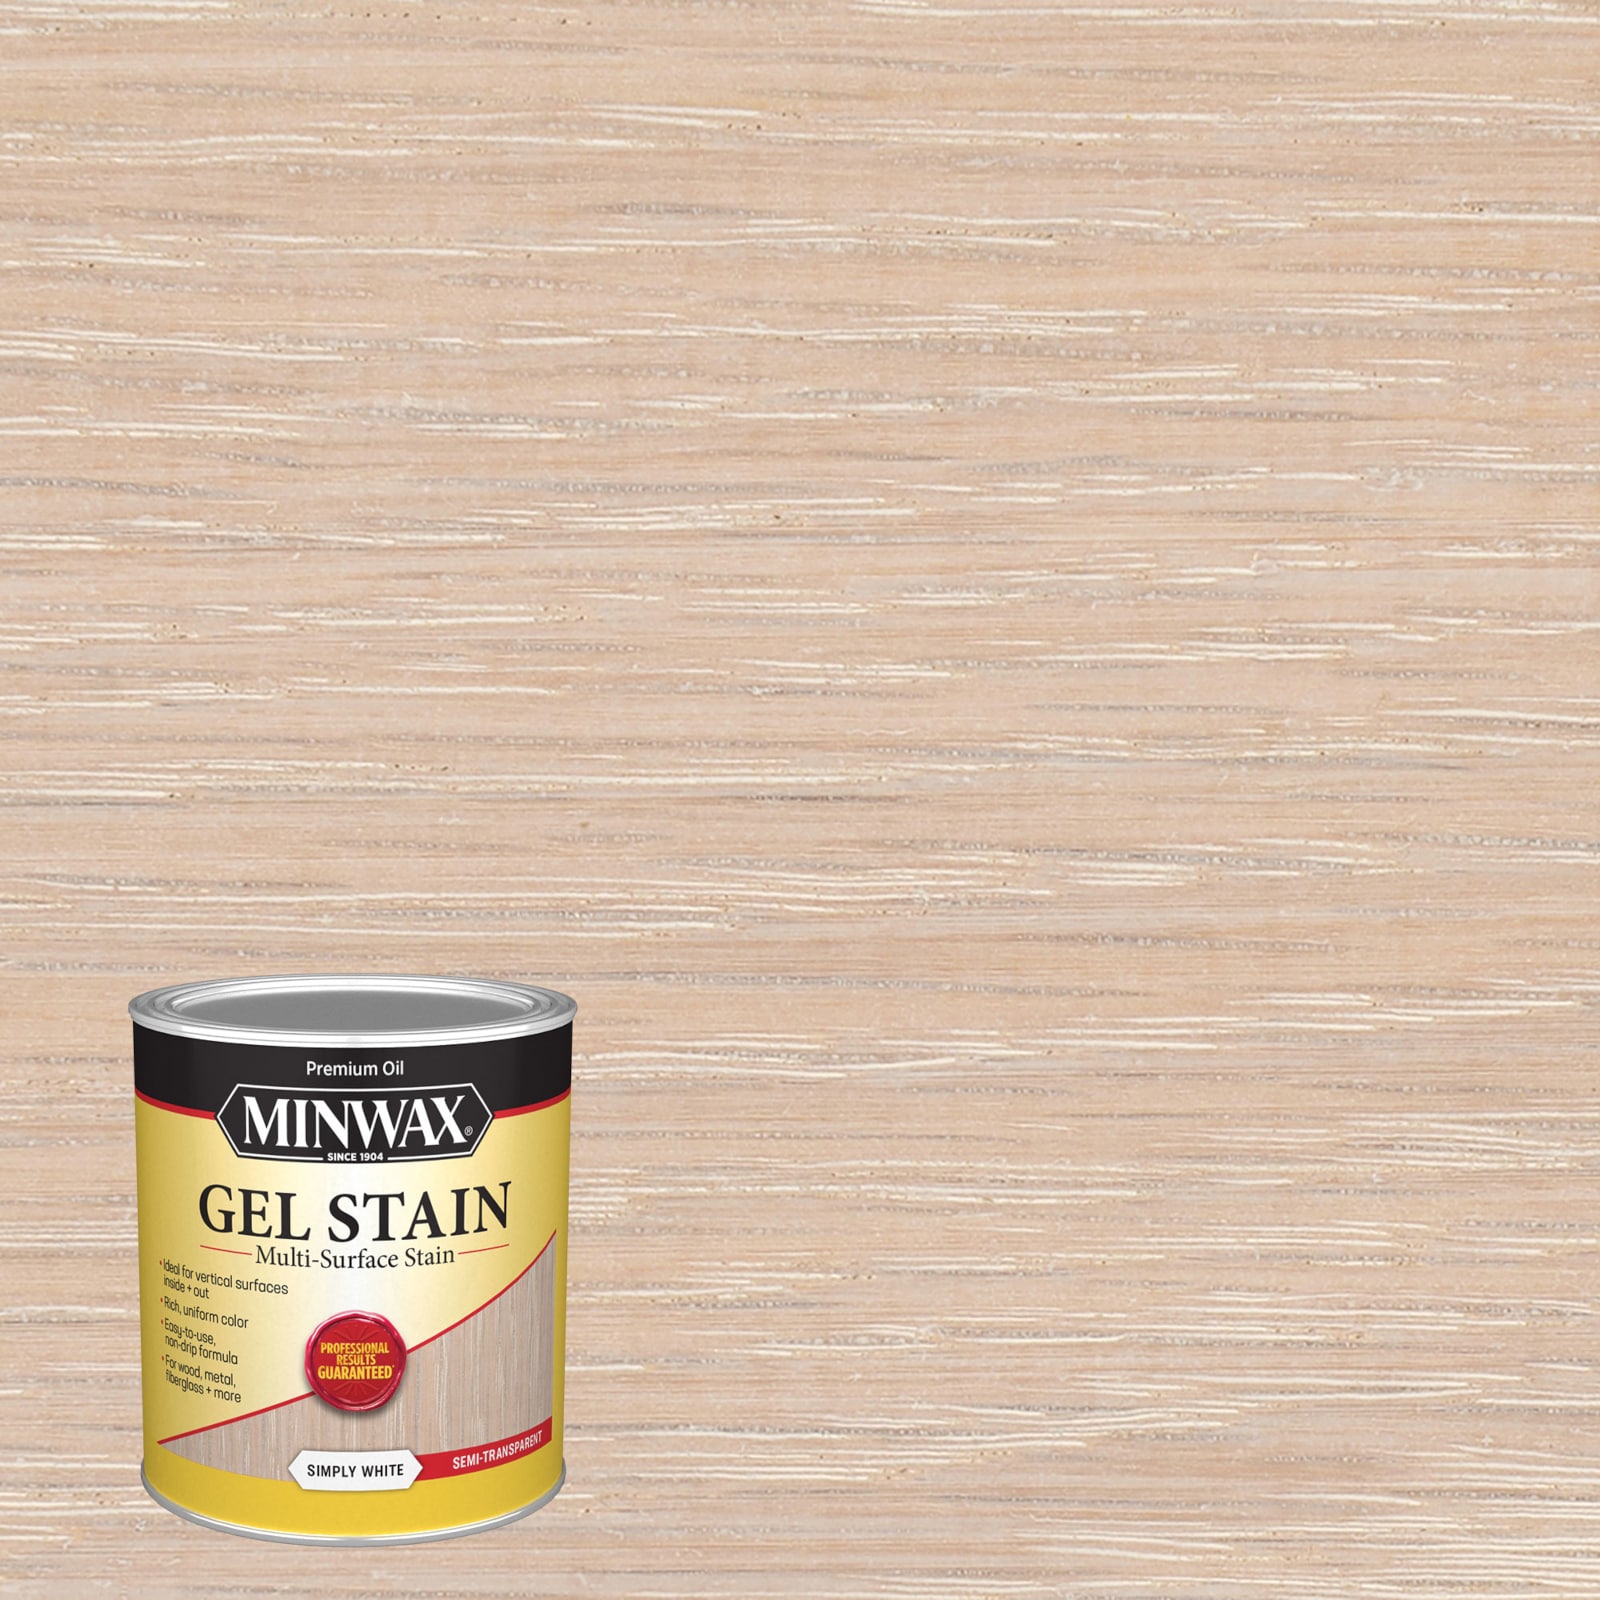 3 Best Kinds of Stain (Oil Based - Gel Stain - Water Based) and